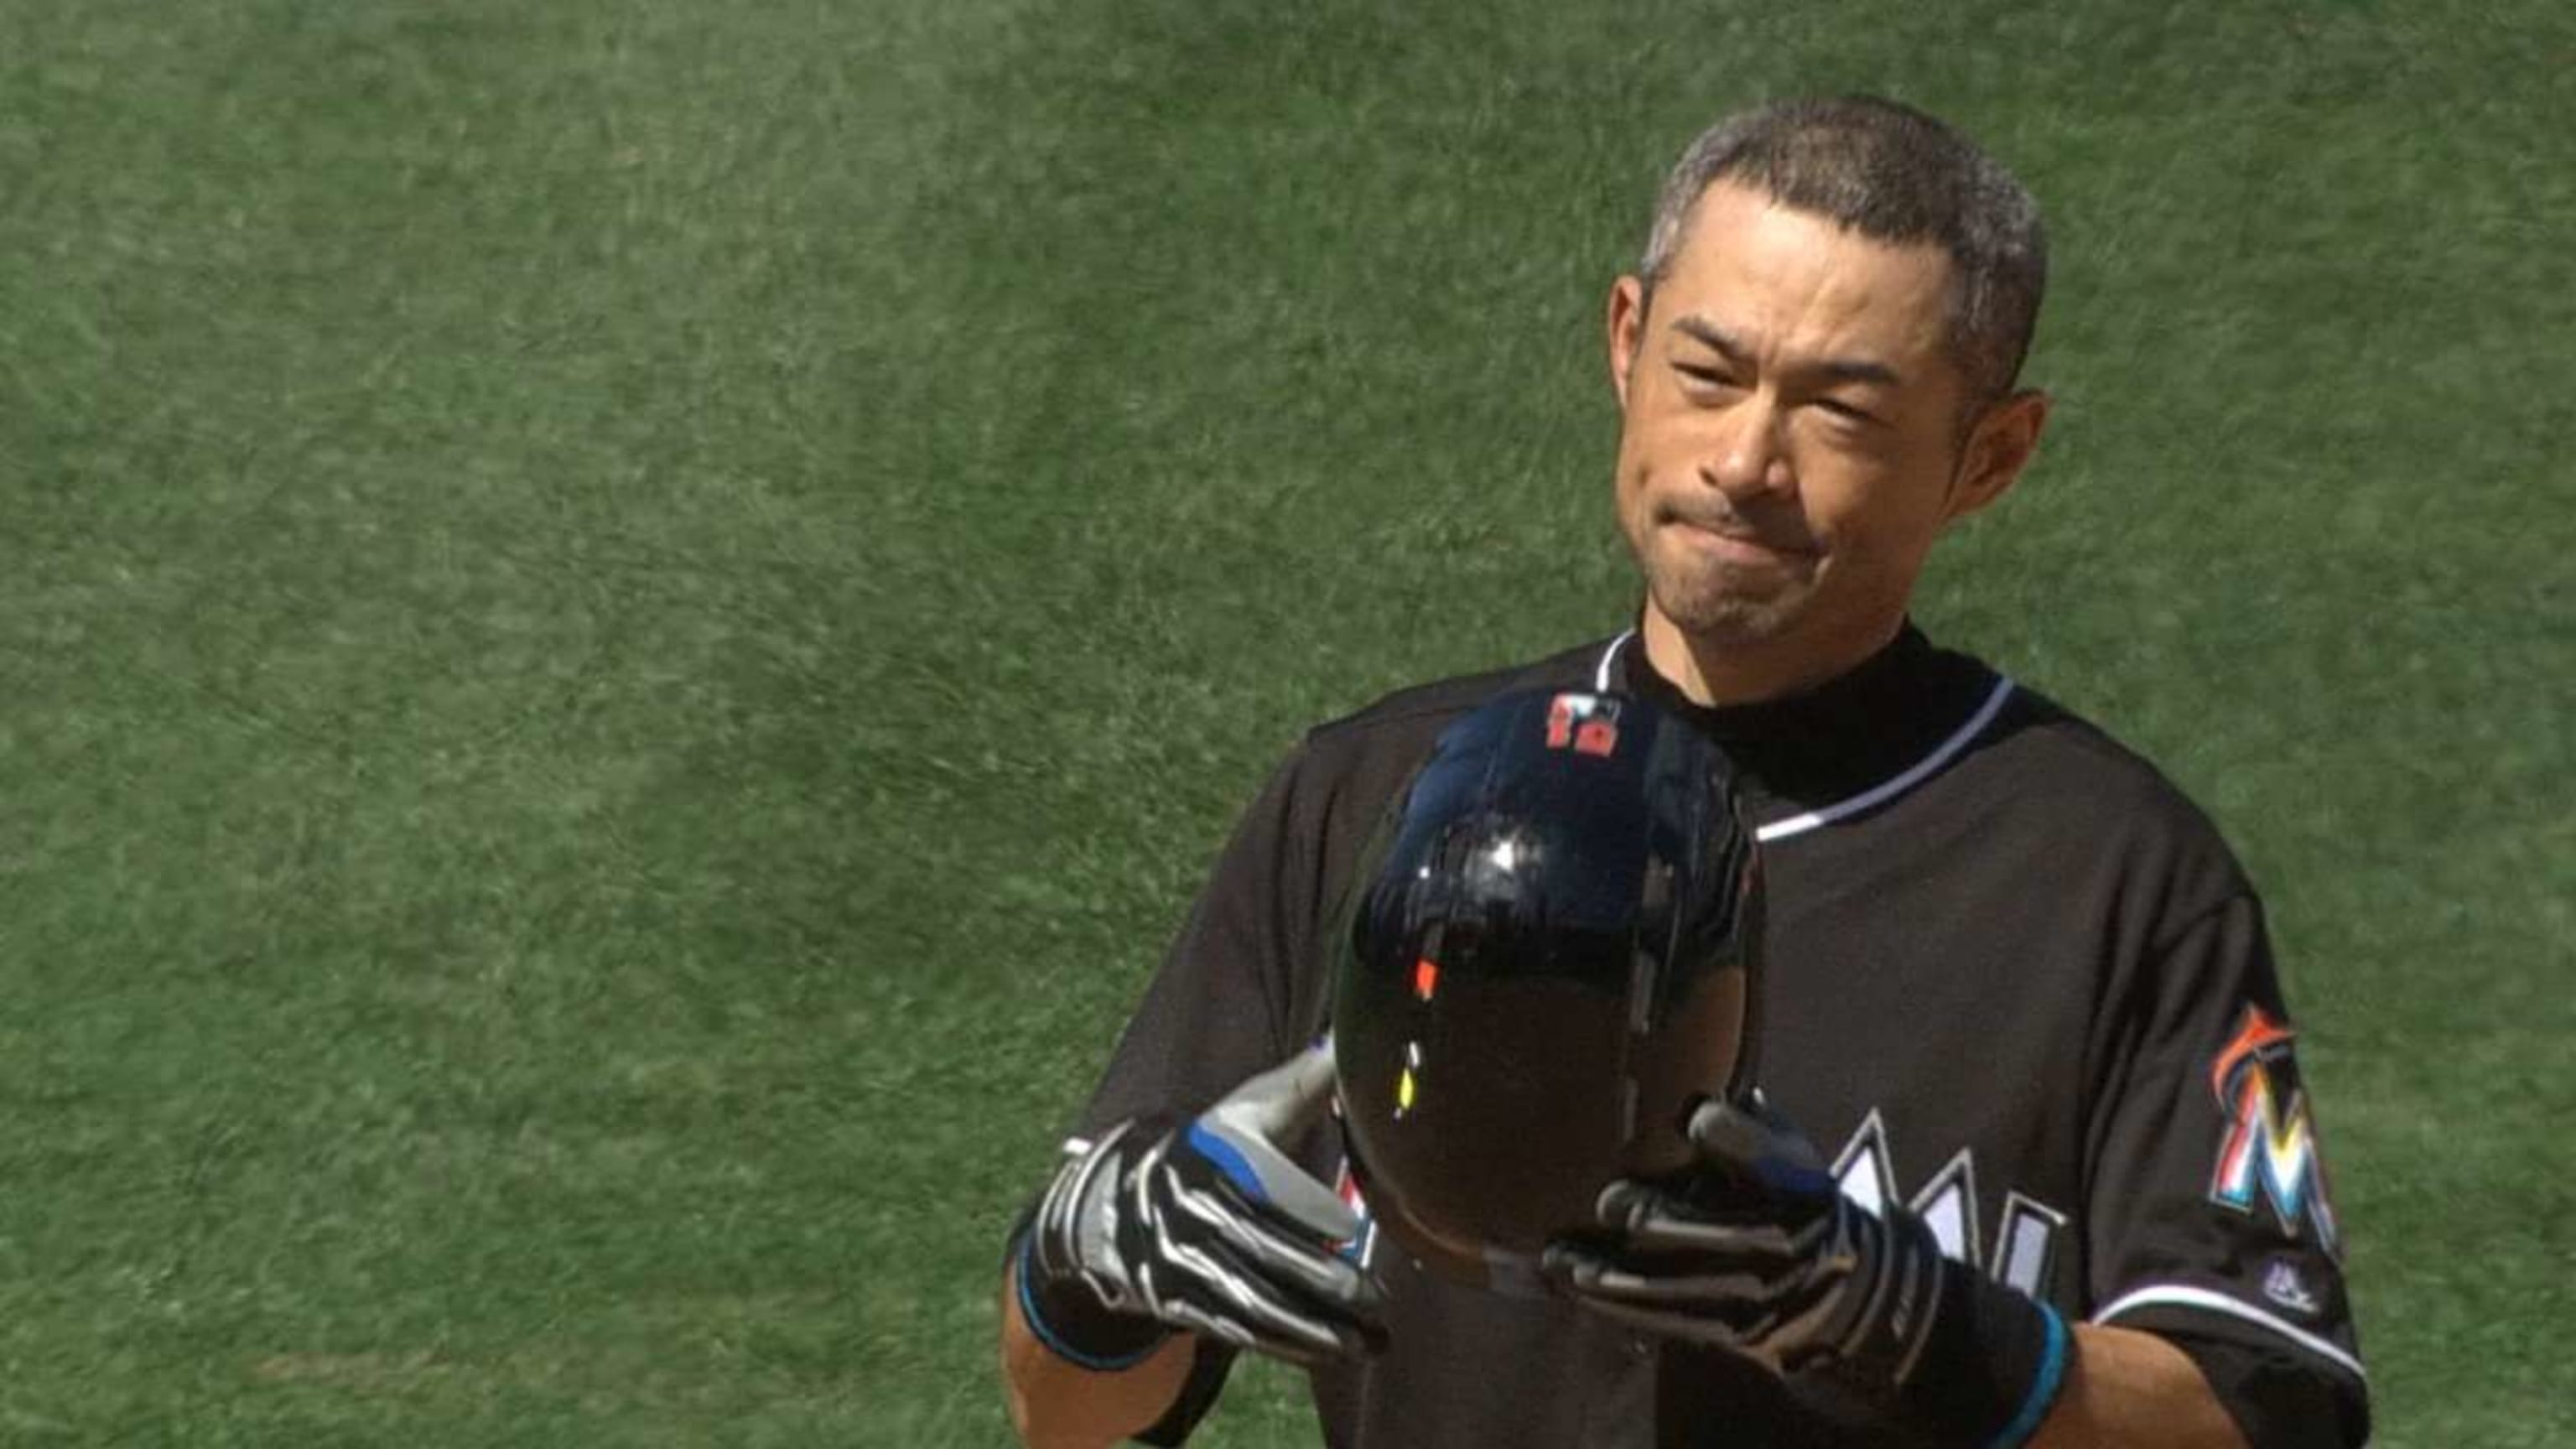 At 45, Ichiro Suzuki Concludes a Pioneering Career in Japan - The